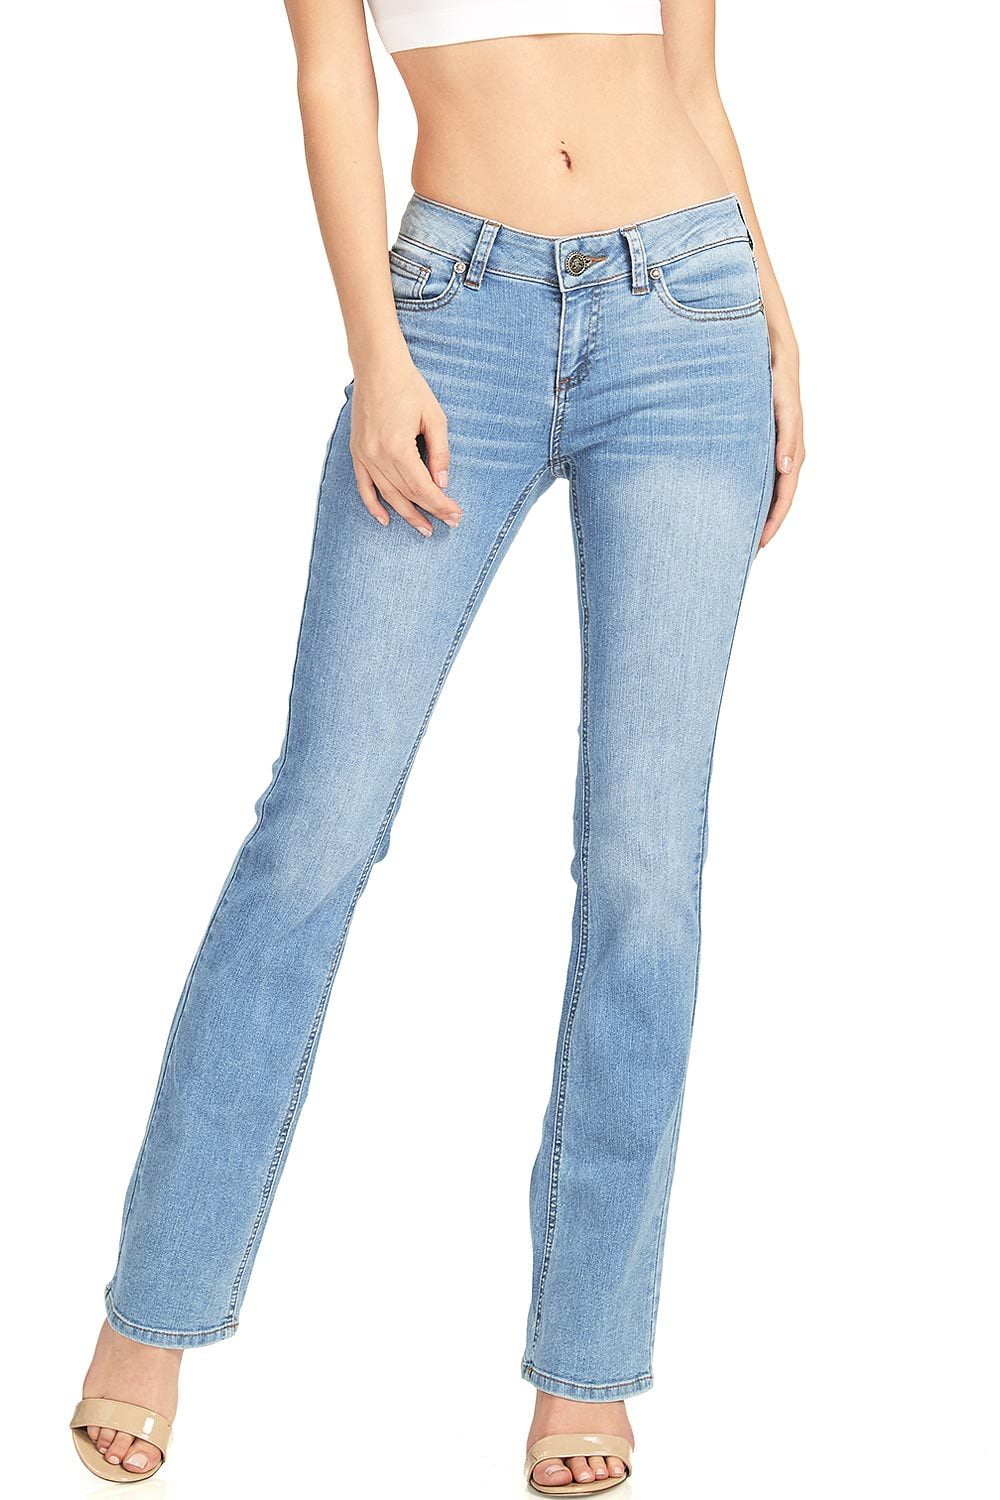 Buy > womens light blue bootcut jeans > in stock